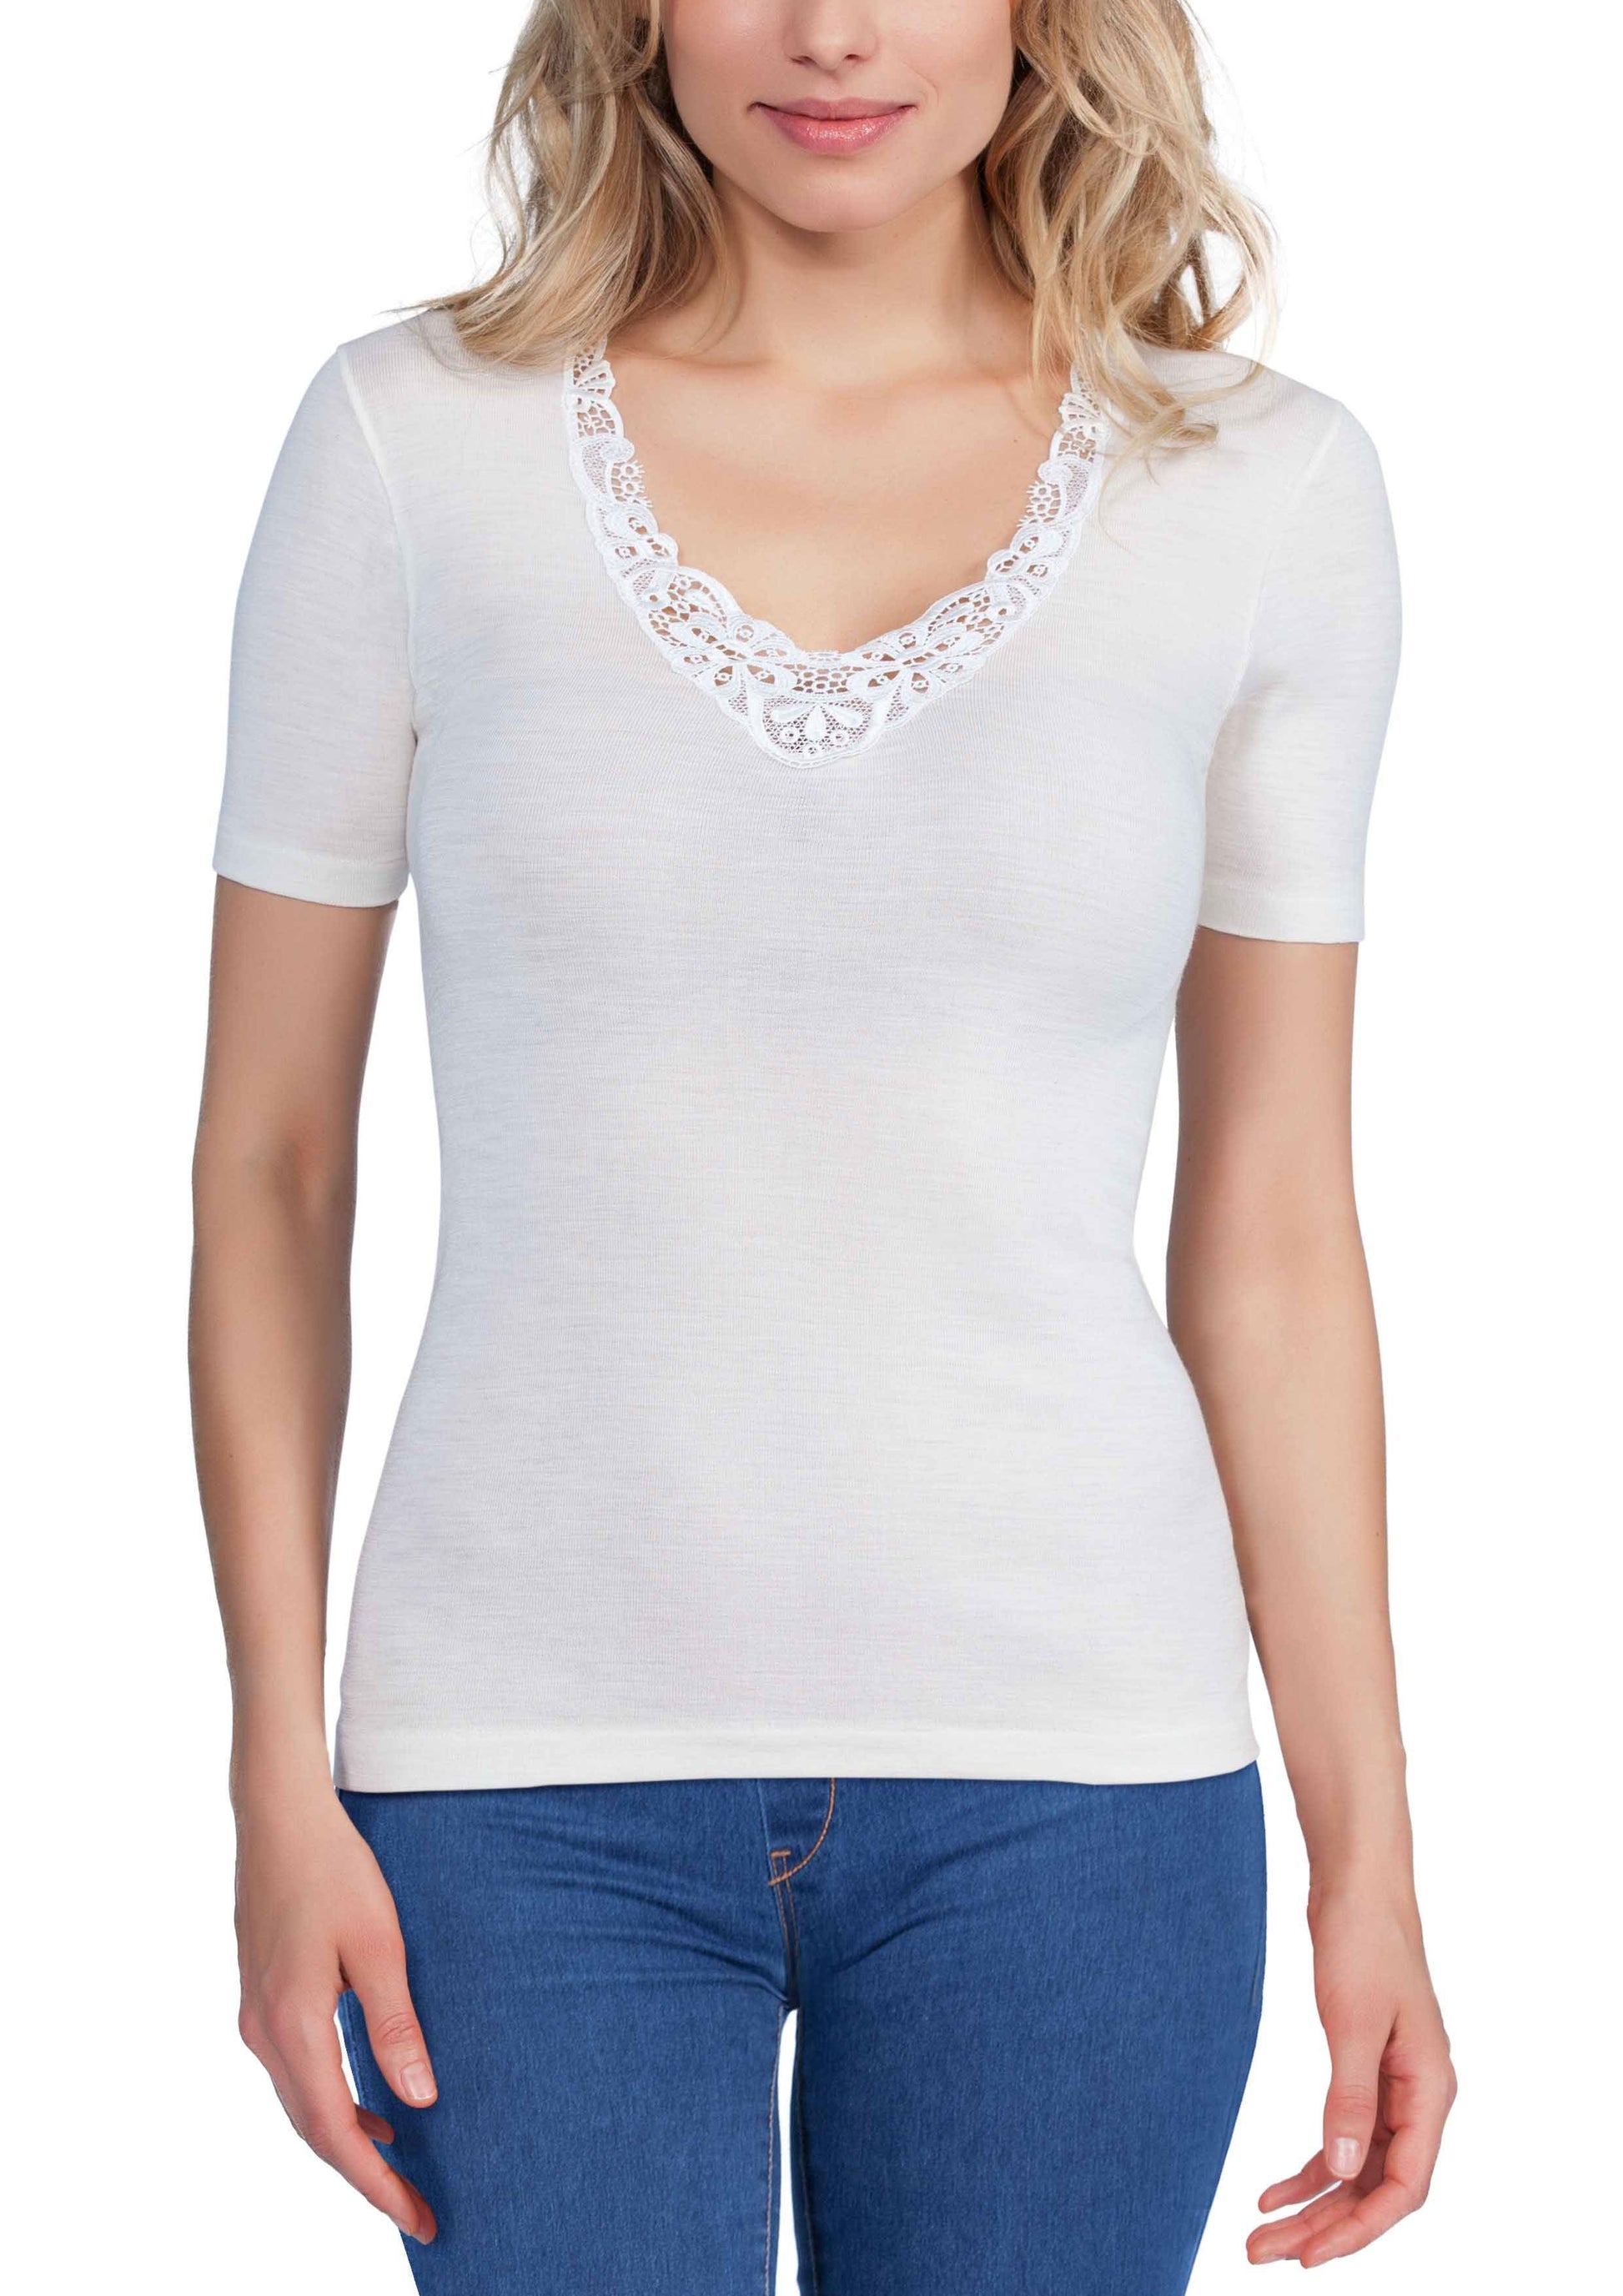 Wool & Silk Macramé Lace Top by EGi from Italy